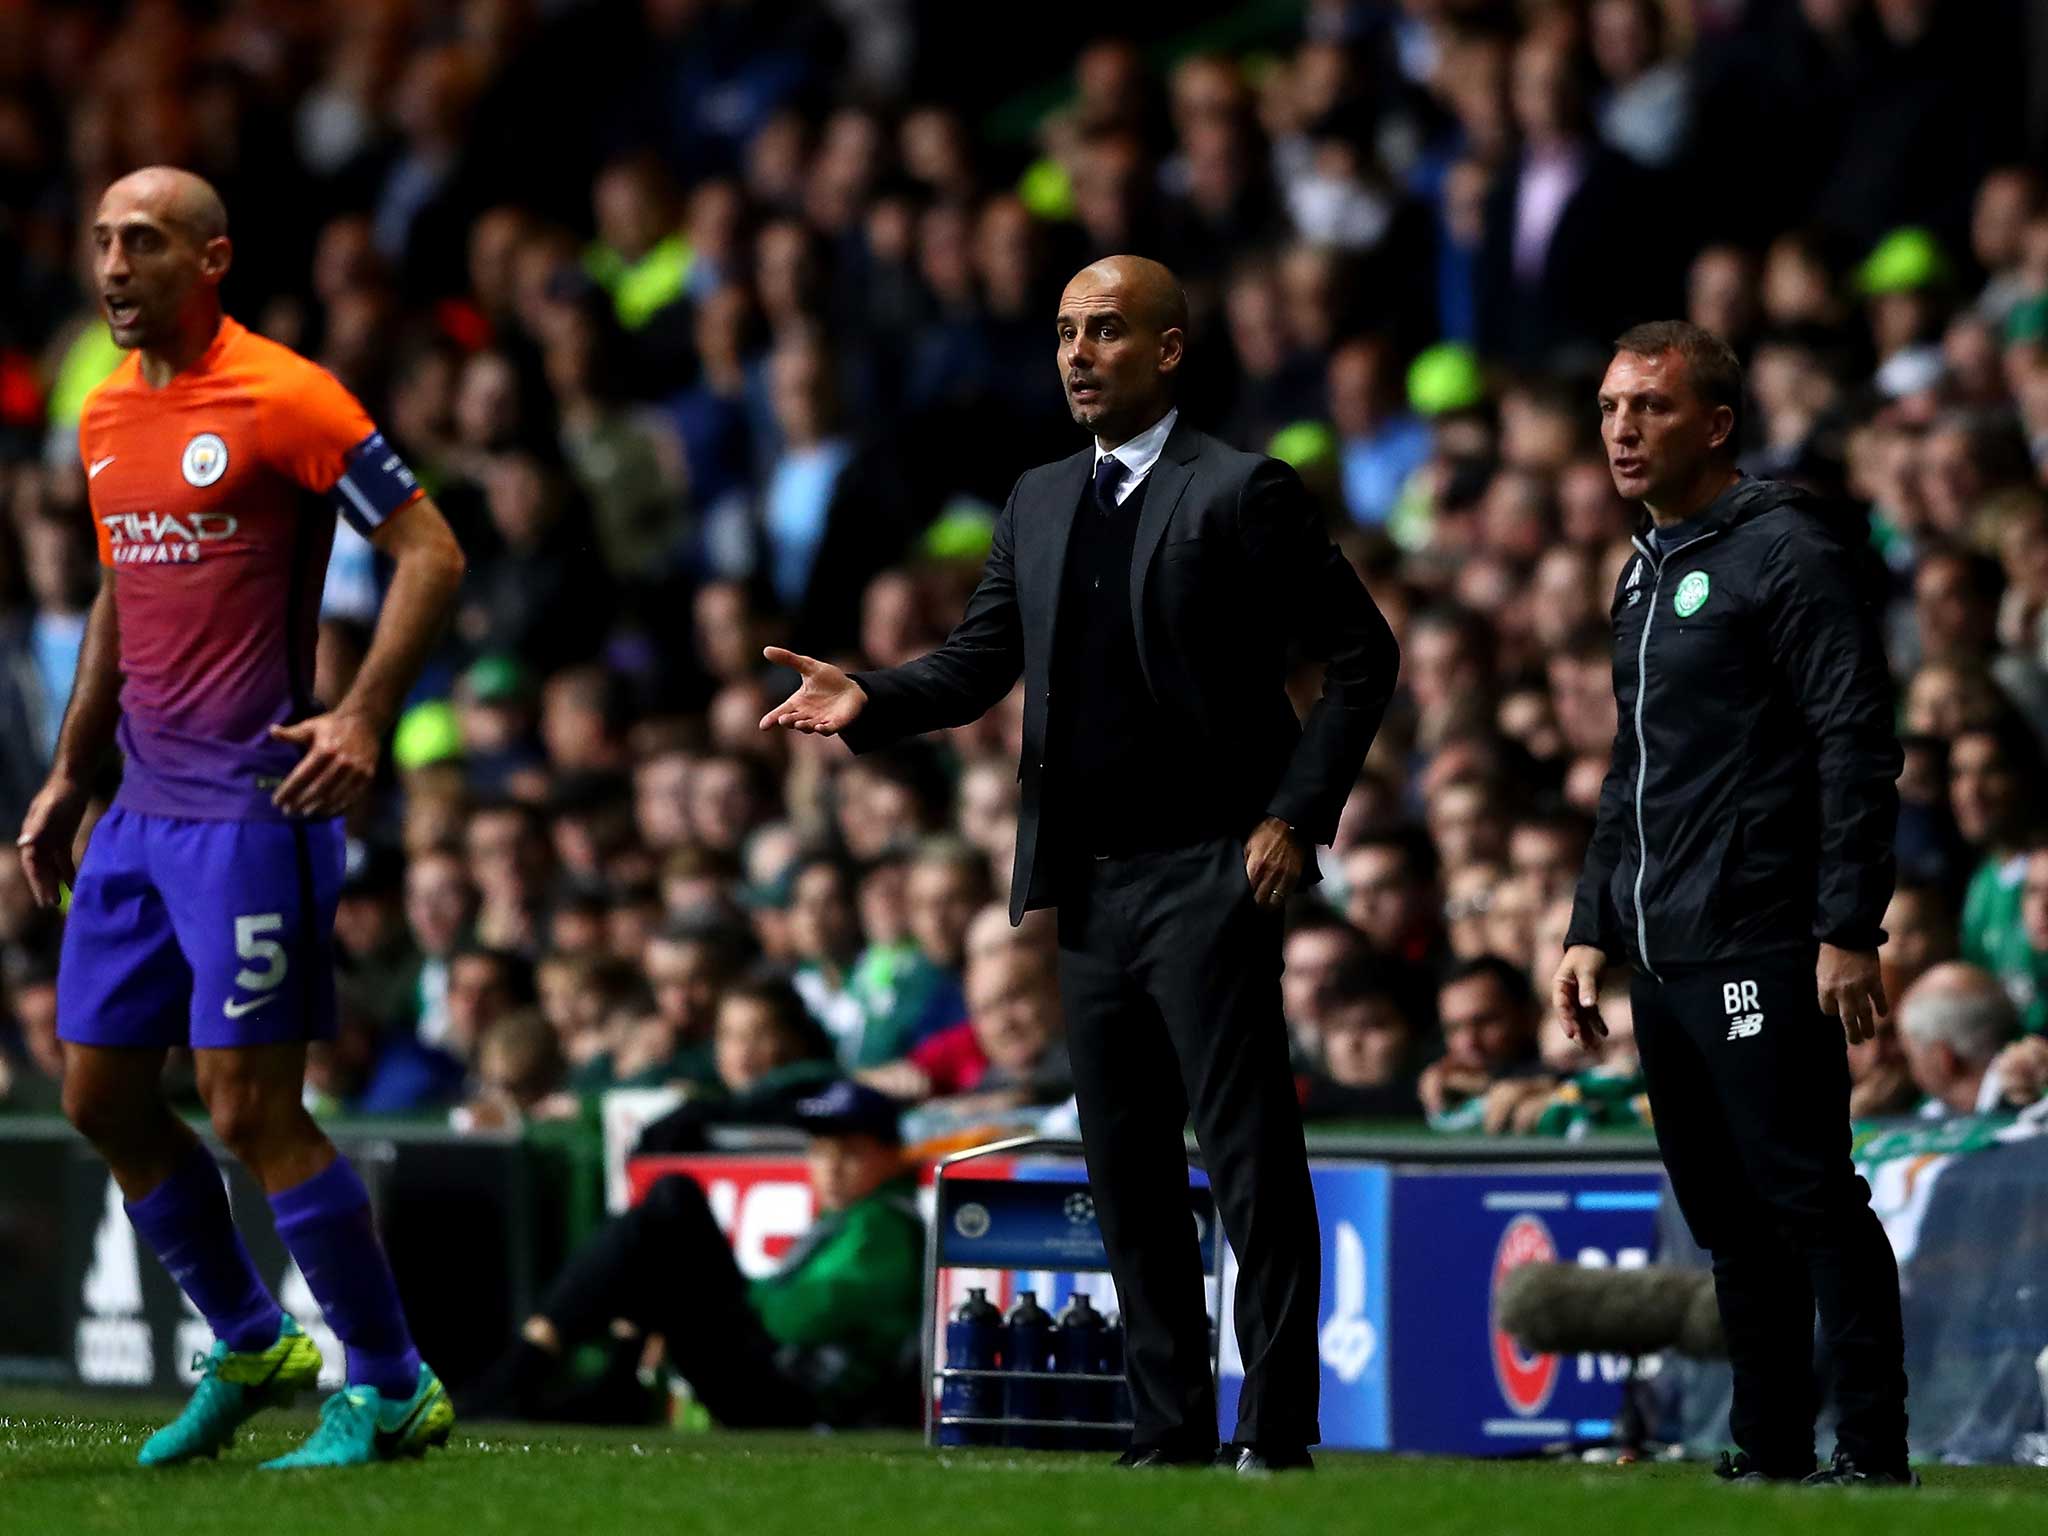 Pep Guardiola protests on the side-lines at Celtic Park